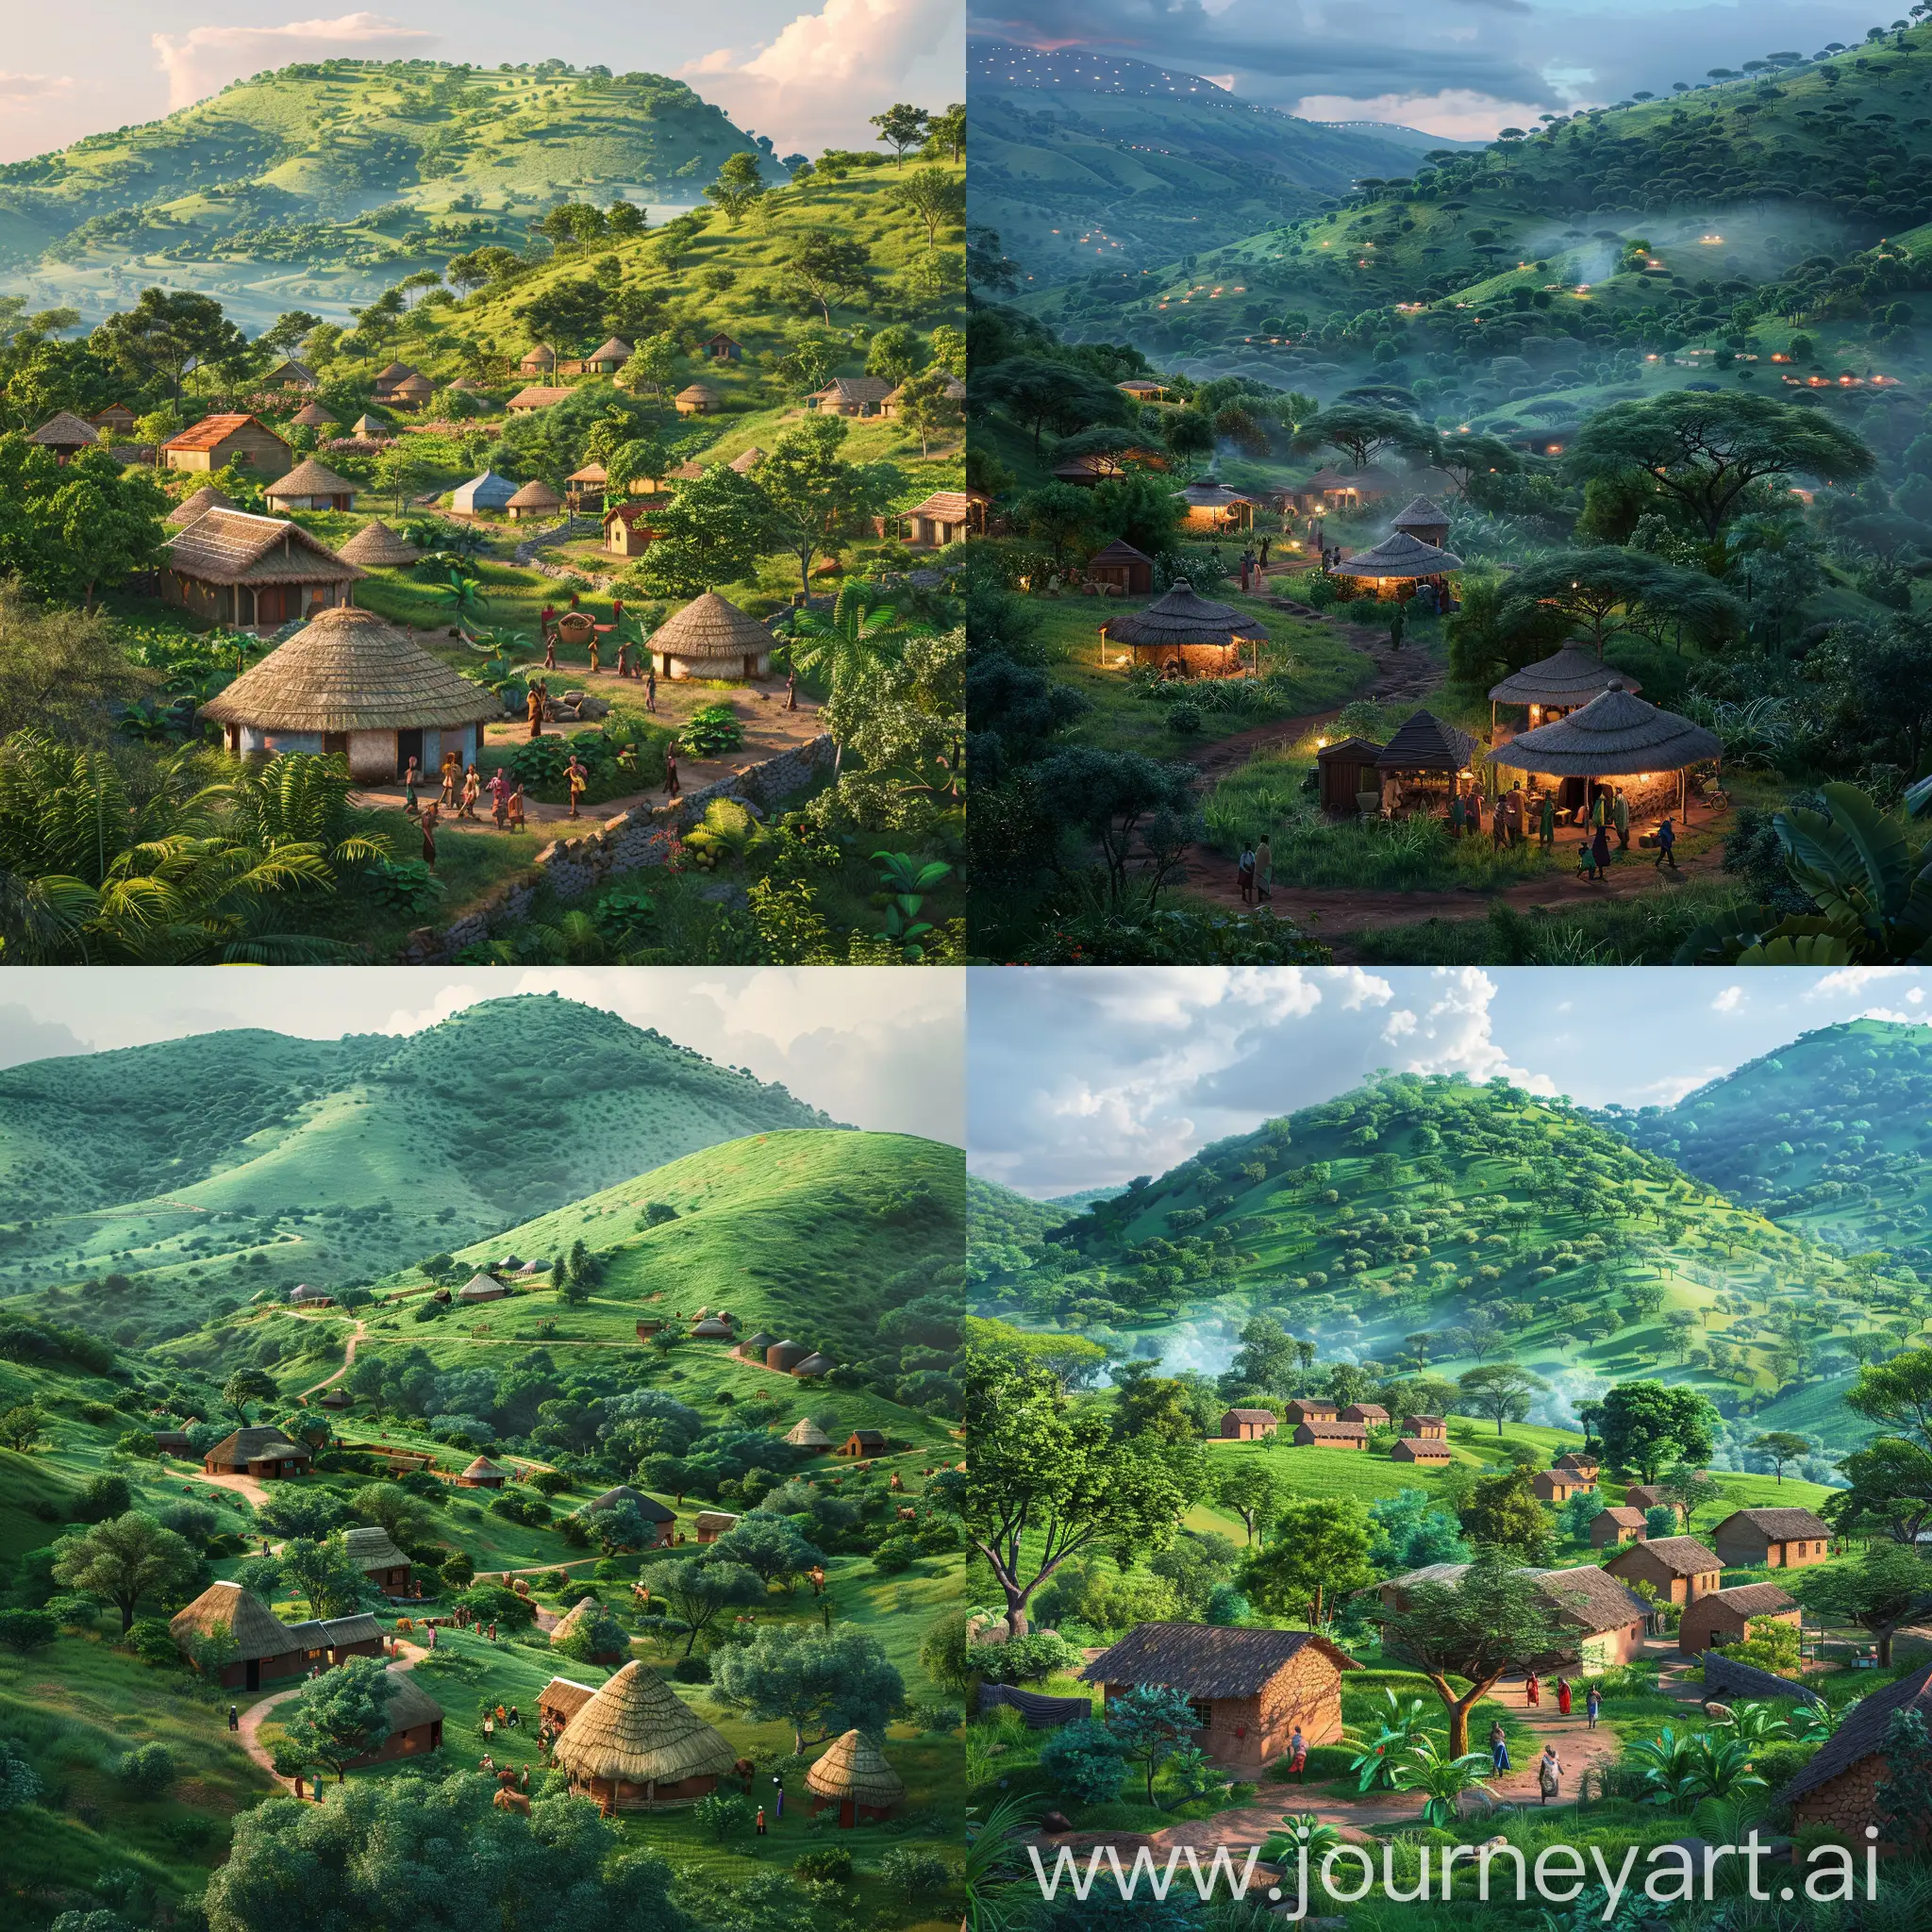 Big People's? A peaceful African village nestled among lush green hills, with smiling villagers going about their daily routines. Colorful, hyper realistic, soft lighting.